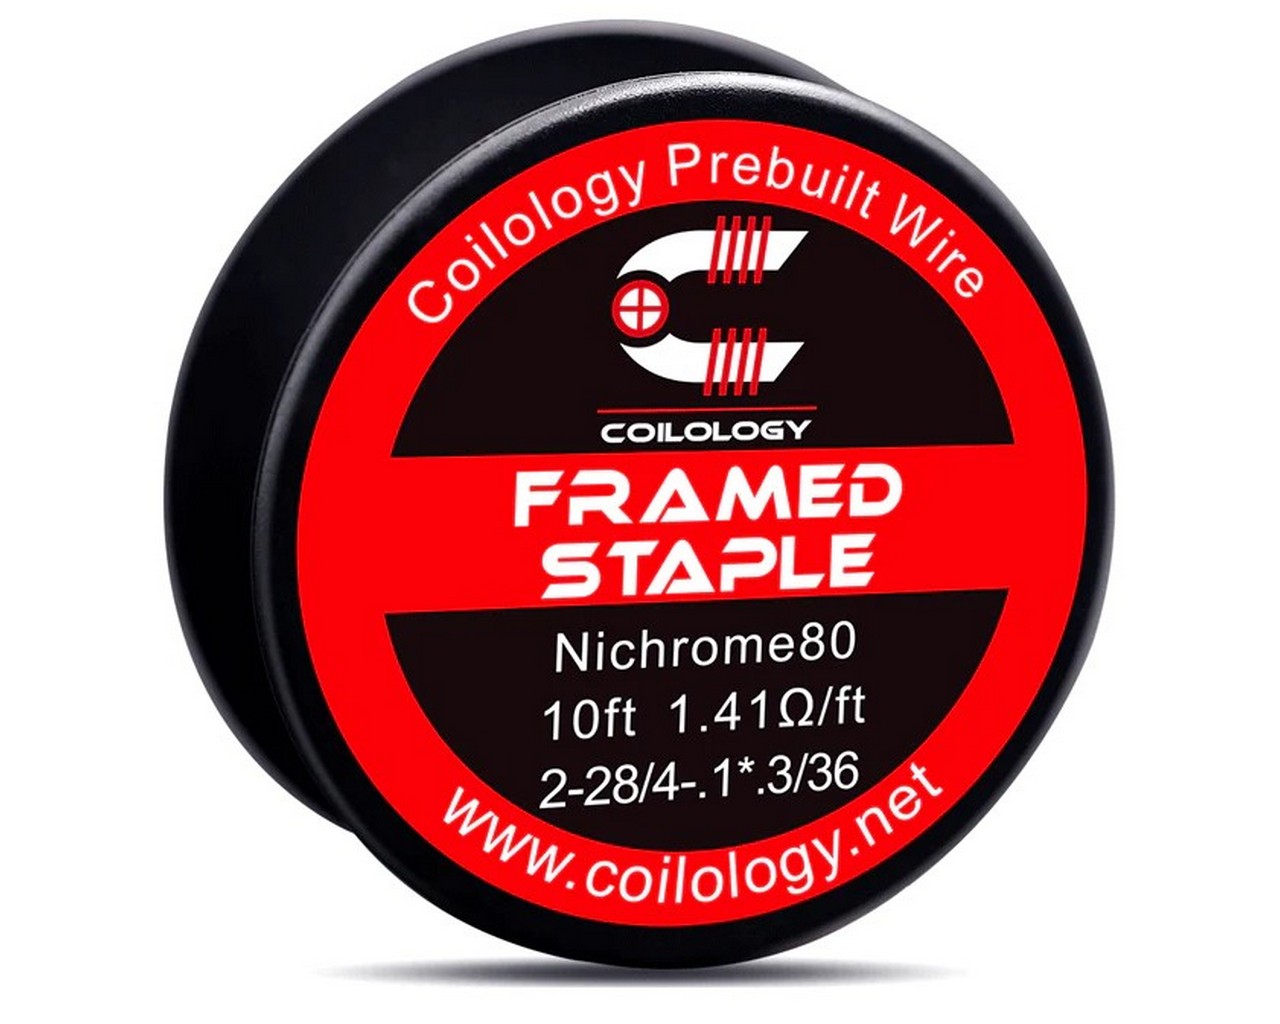 Coilology Framed Staple Spool Wire NI80 2-28/4-.4*.1/36 | 1.41ohm/ft | 3m